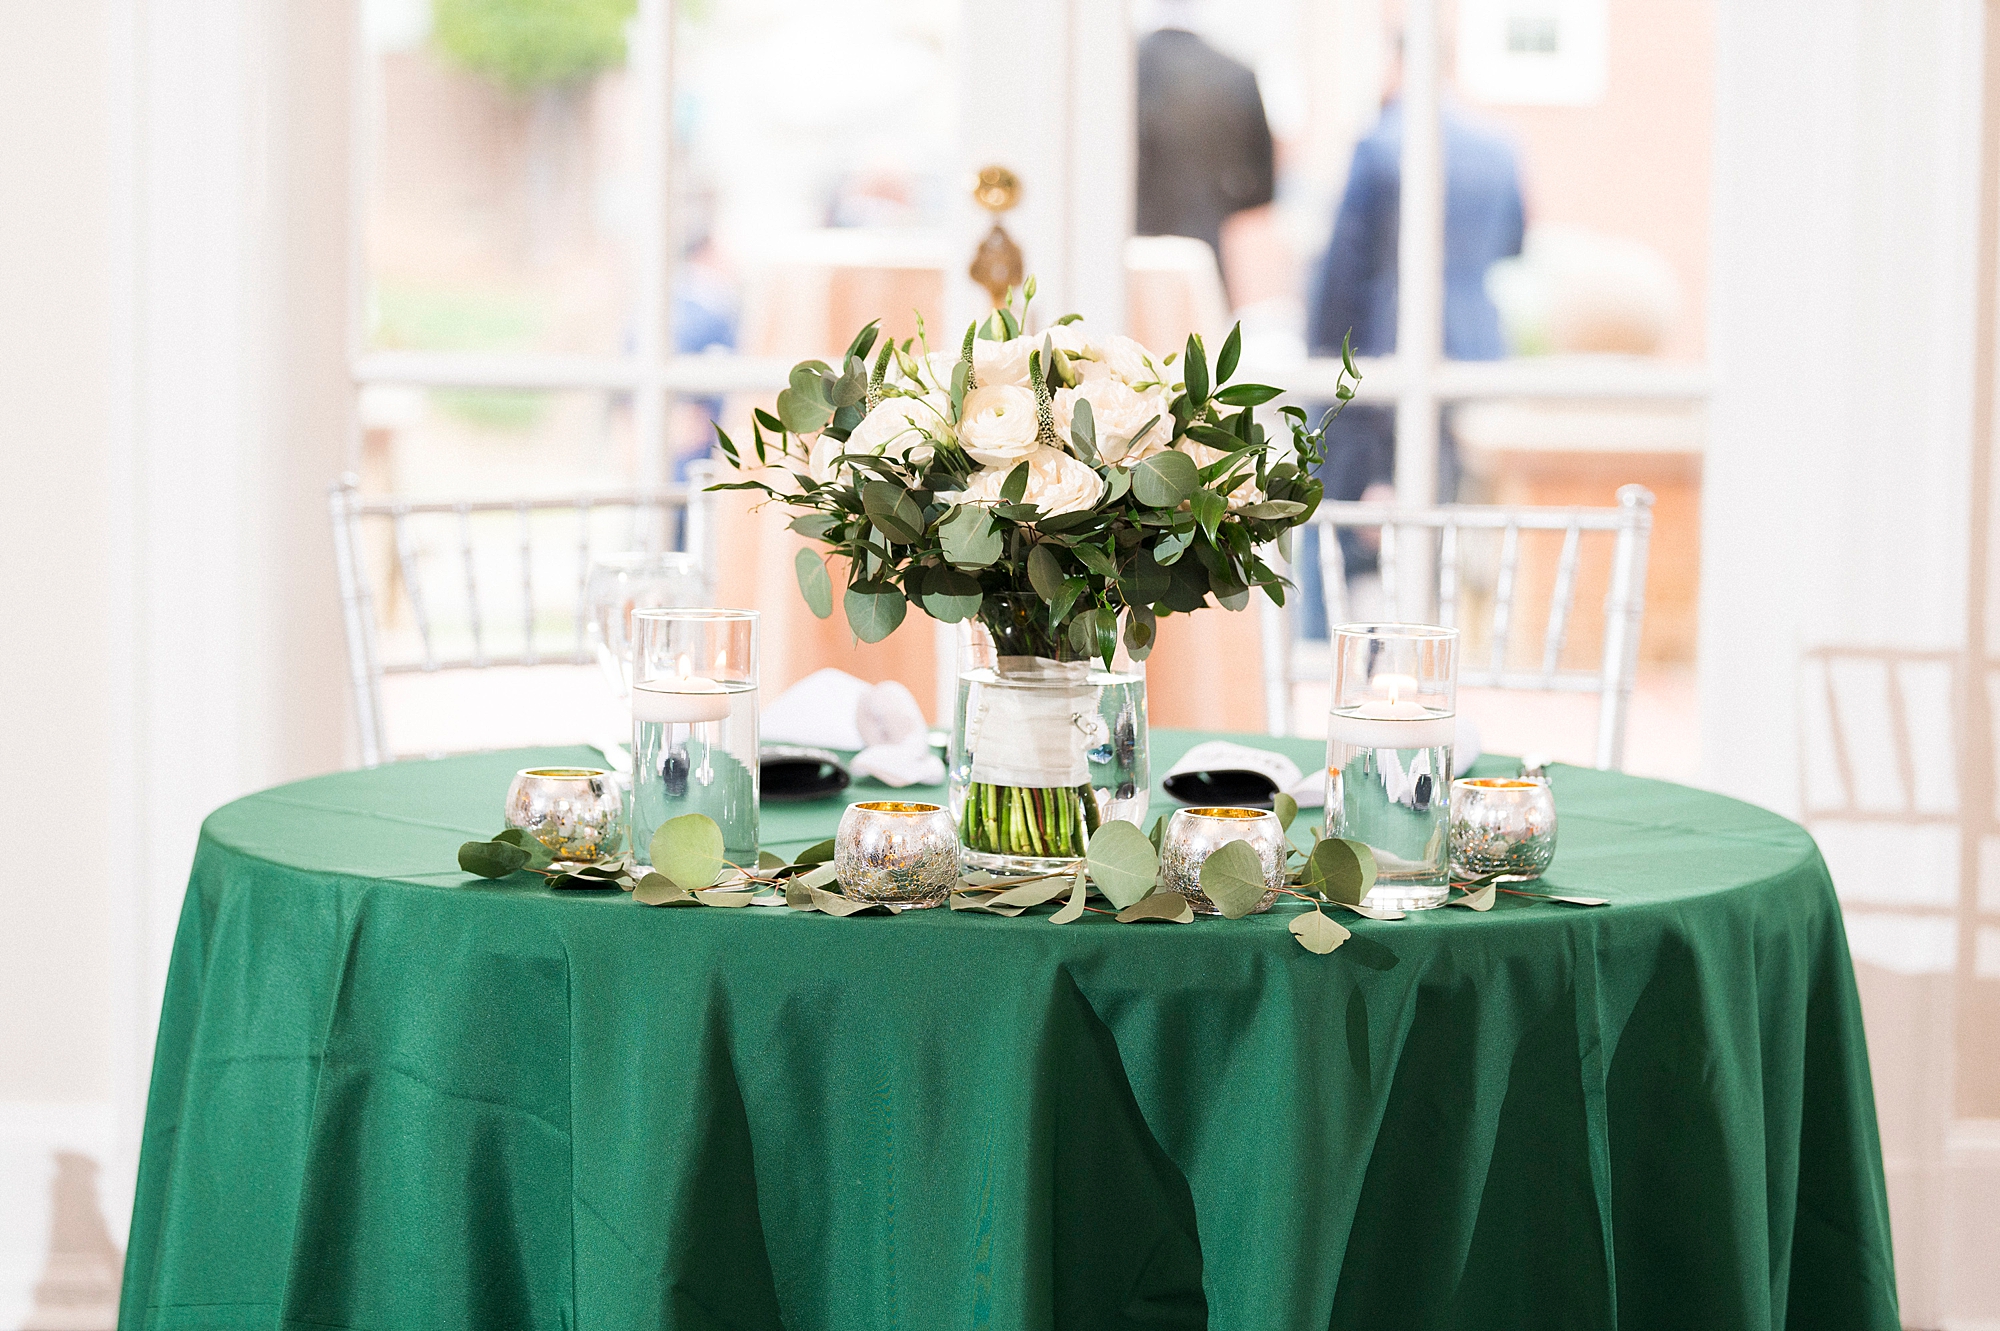 sweetheart table with bouquet of flowers